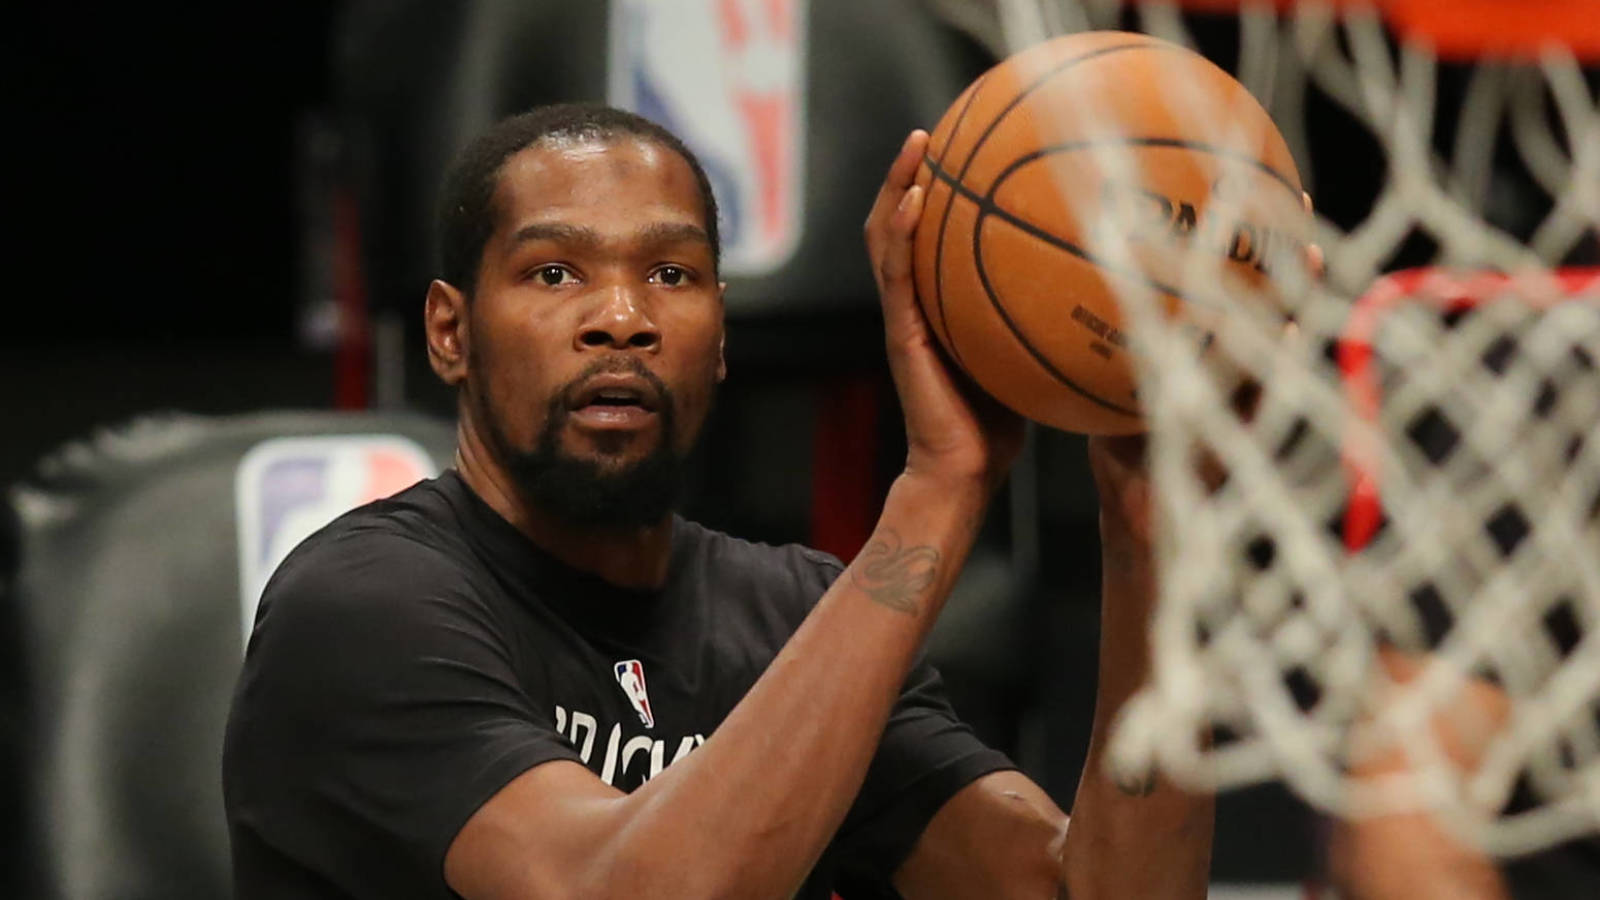 Jan 18, 2021; Brooklyn, New York, USA; Brooklyn Nets power forward Kevin Durant (7) warms up before a game against the Milwaukee Bucks at Barclays Center. Mandatory Credit: Brad Penner-USA TODAY Sports